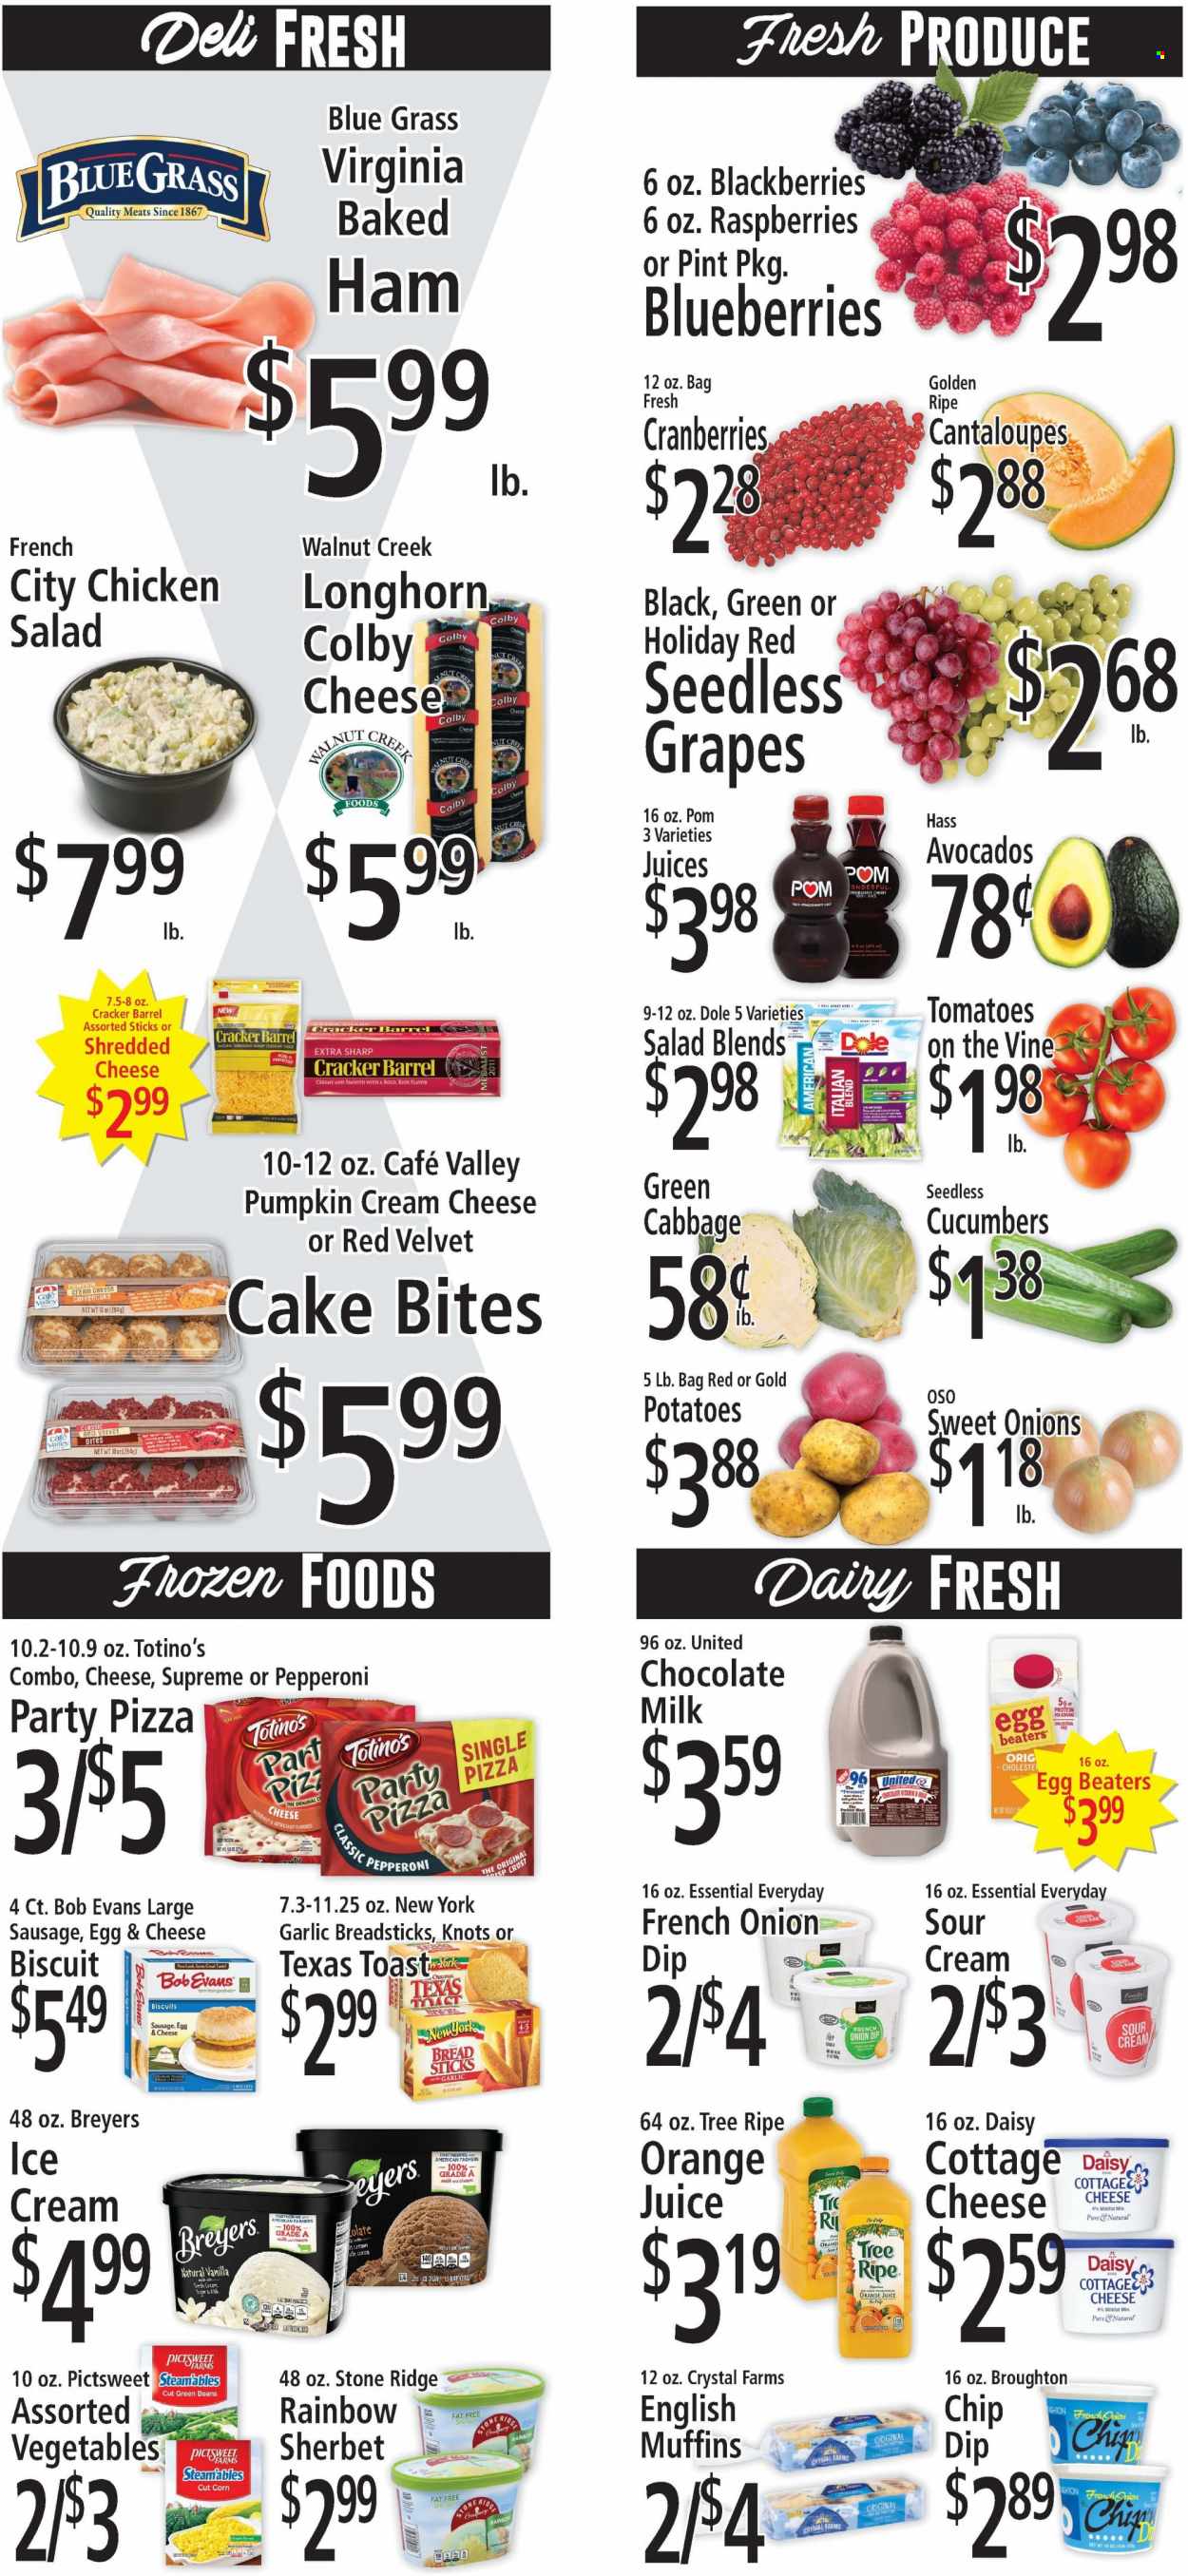 thumbnail - Food Fair Market Flyer - 11/27/2022 - 12/03/2022 - Sales products - english muffins, cake, coffee cake, beans, cabbage, cantaloupe, corn, cucumber, green beans, potatoes, pumpkin, salad, Dole, avocado, blackberries, blueberries, grapes, seedless grapes, cherries, pizza, Bob Evans, ham, sausage, pepperoni, chicken salad, Colby cheese, cottage cheese, Longhorn cheese, shredded cheese, cheddar, milk, eggs, sour cream, dip, ice cream, sherbet, milk chocolate, crackers, biscuit, bread sticks, cocoa, cranberries, orange juice, juice, gin, pomegranate. Page 3.